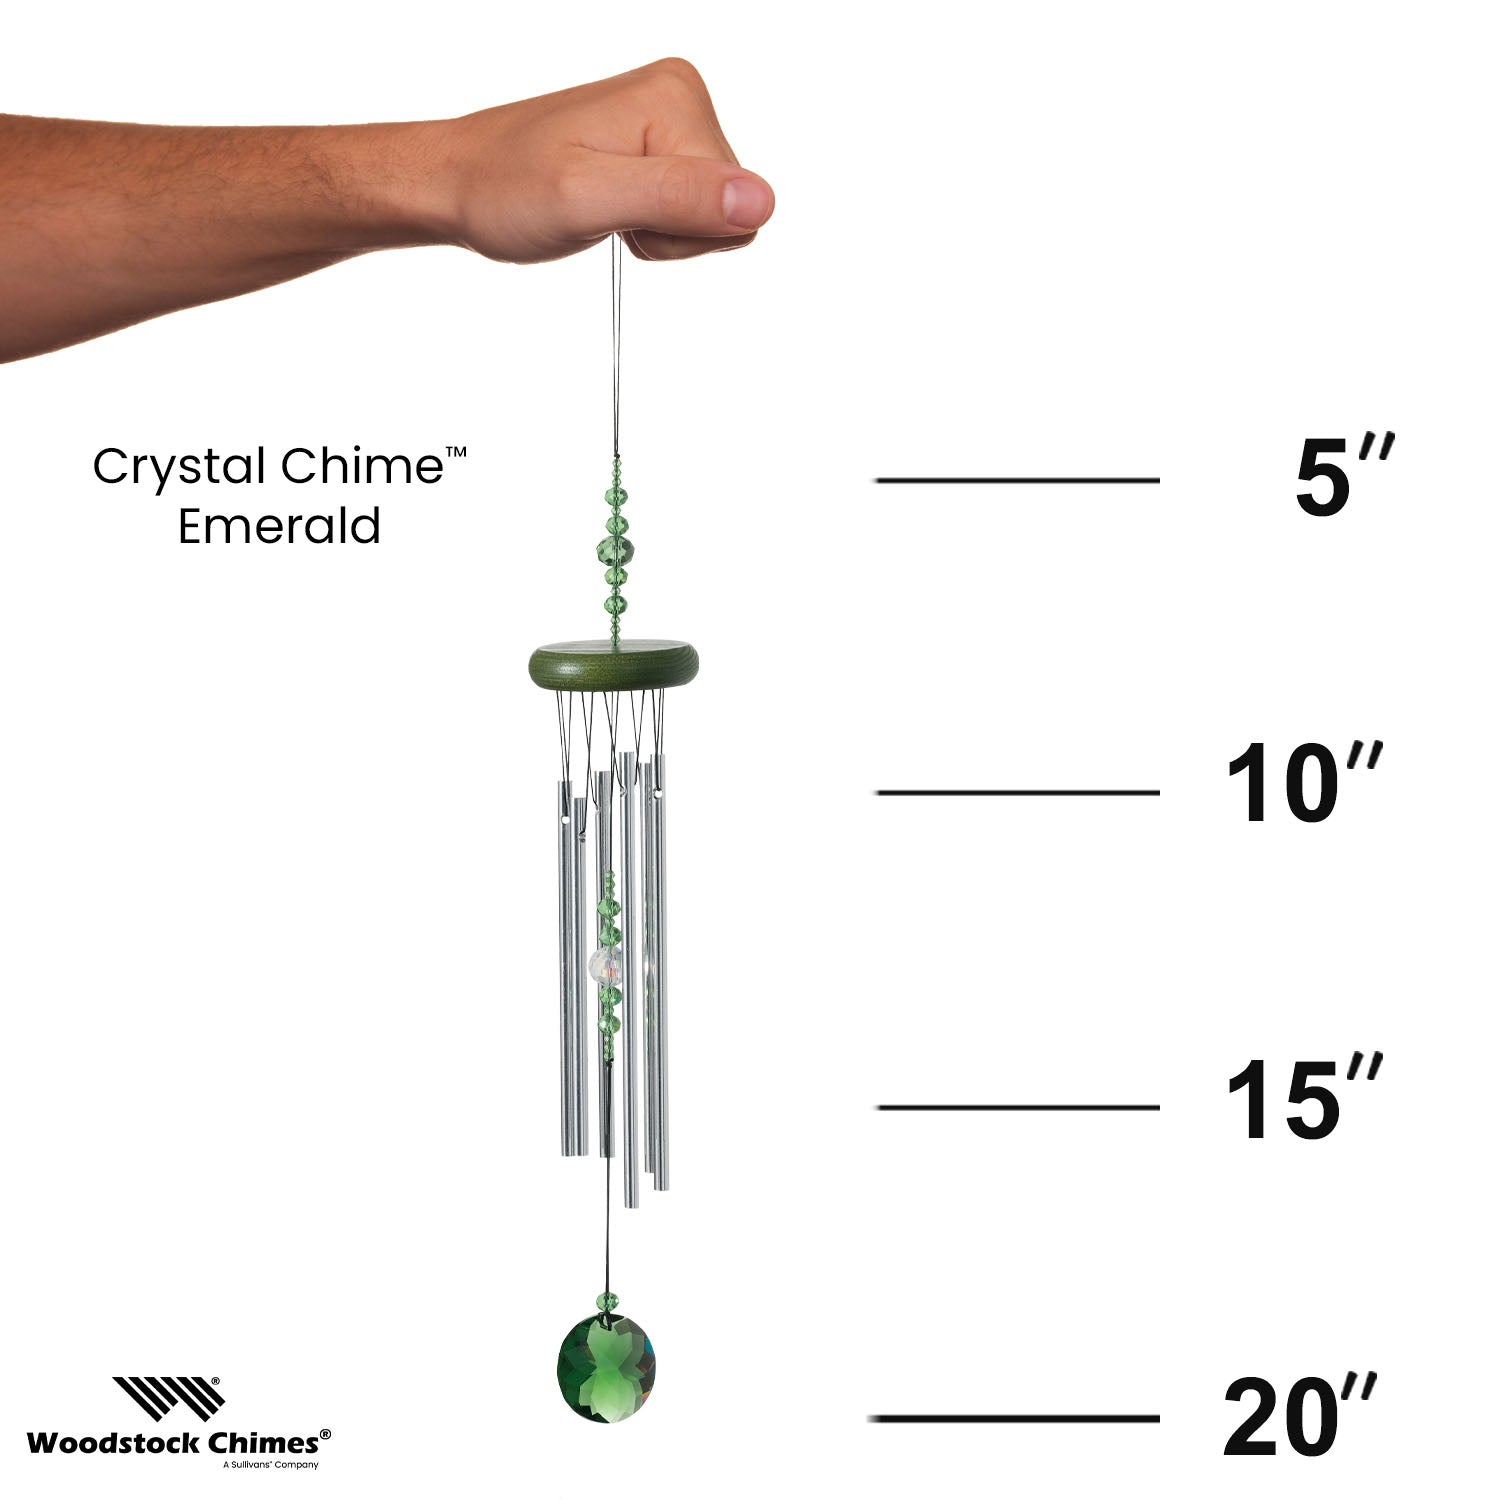 Crystal Chime - Emerald proportion image